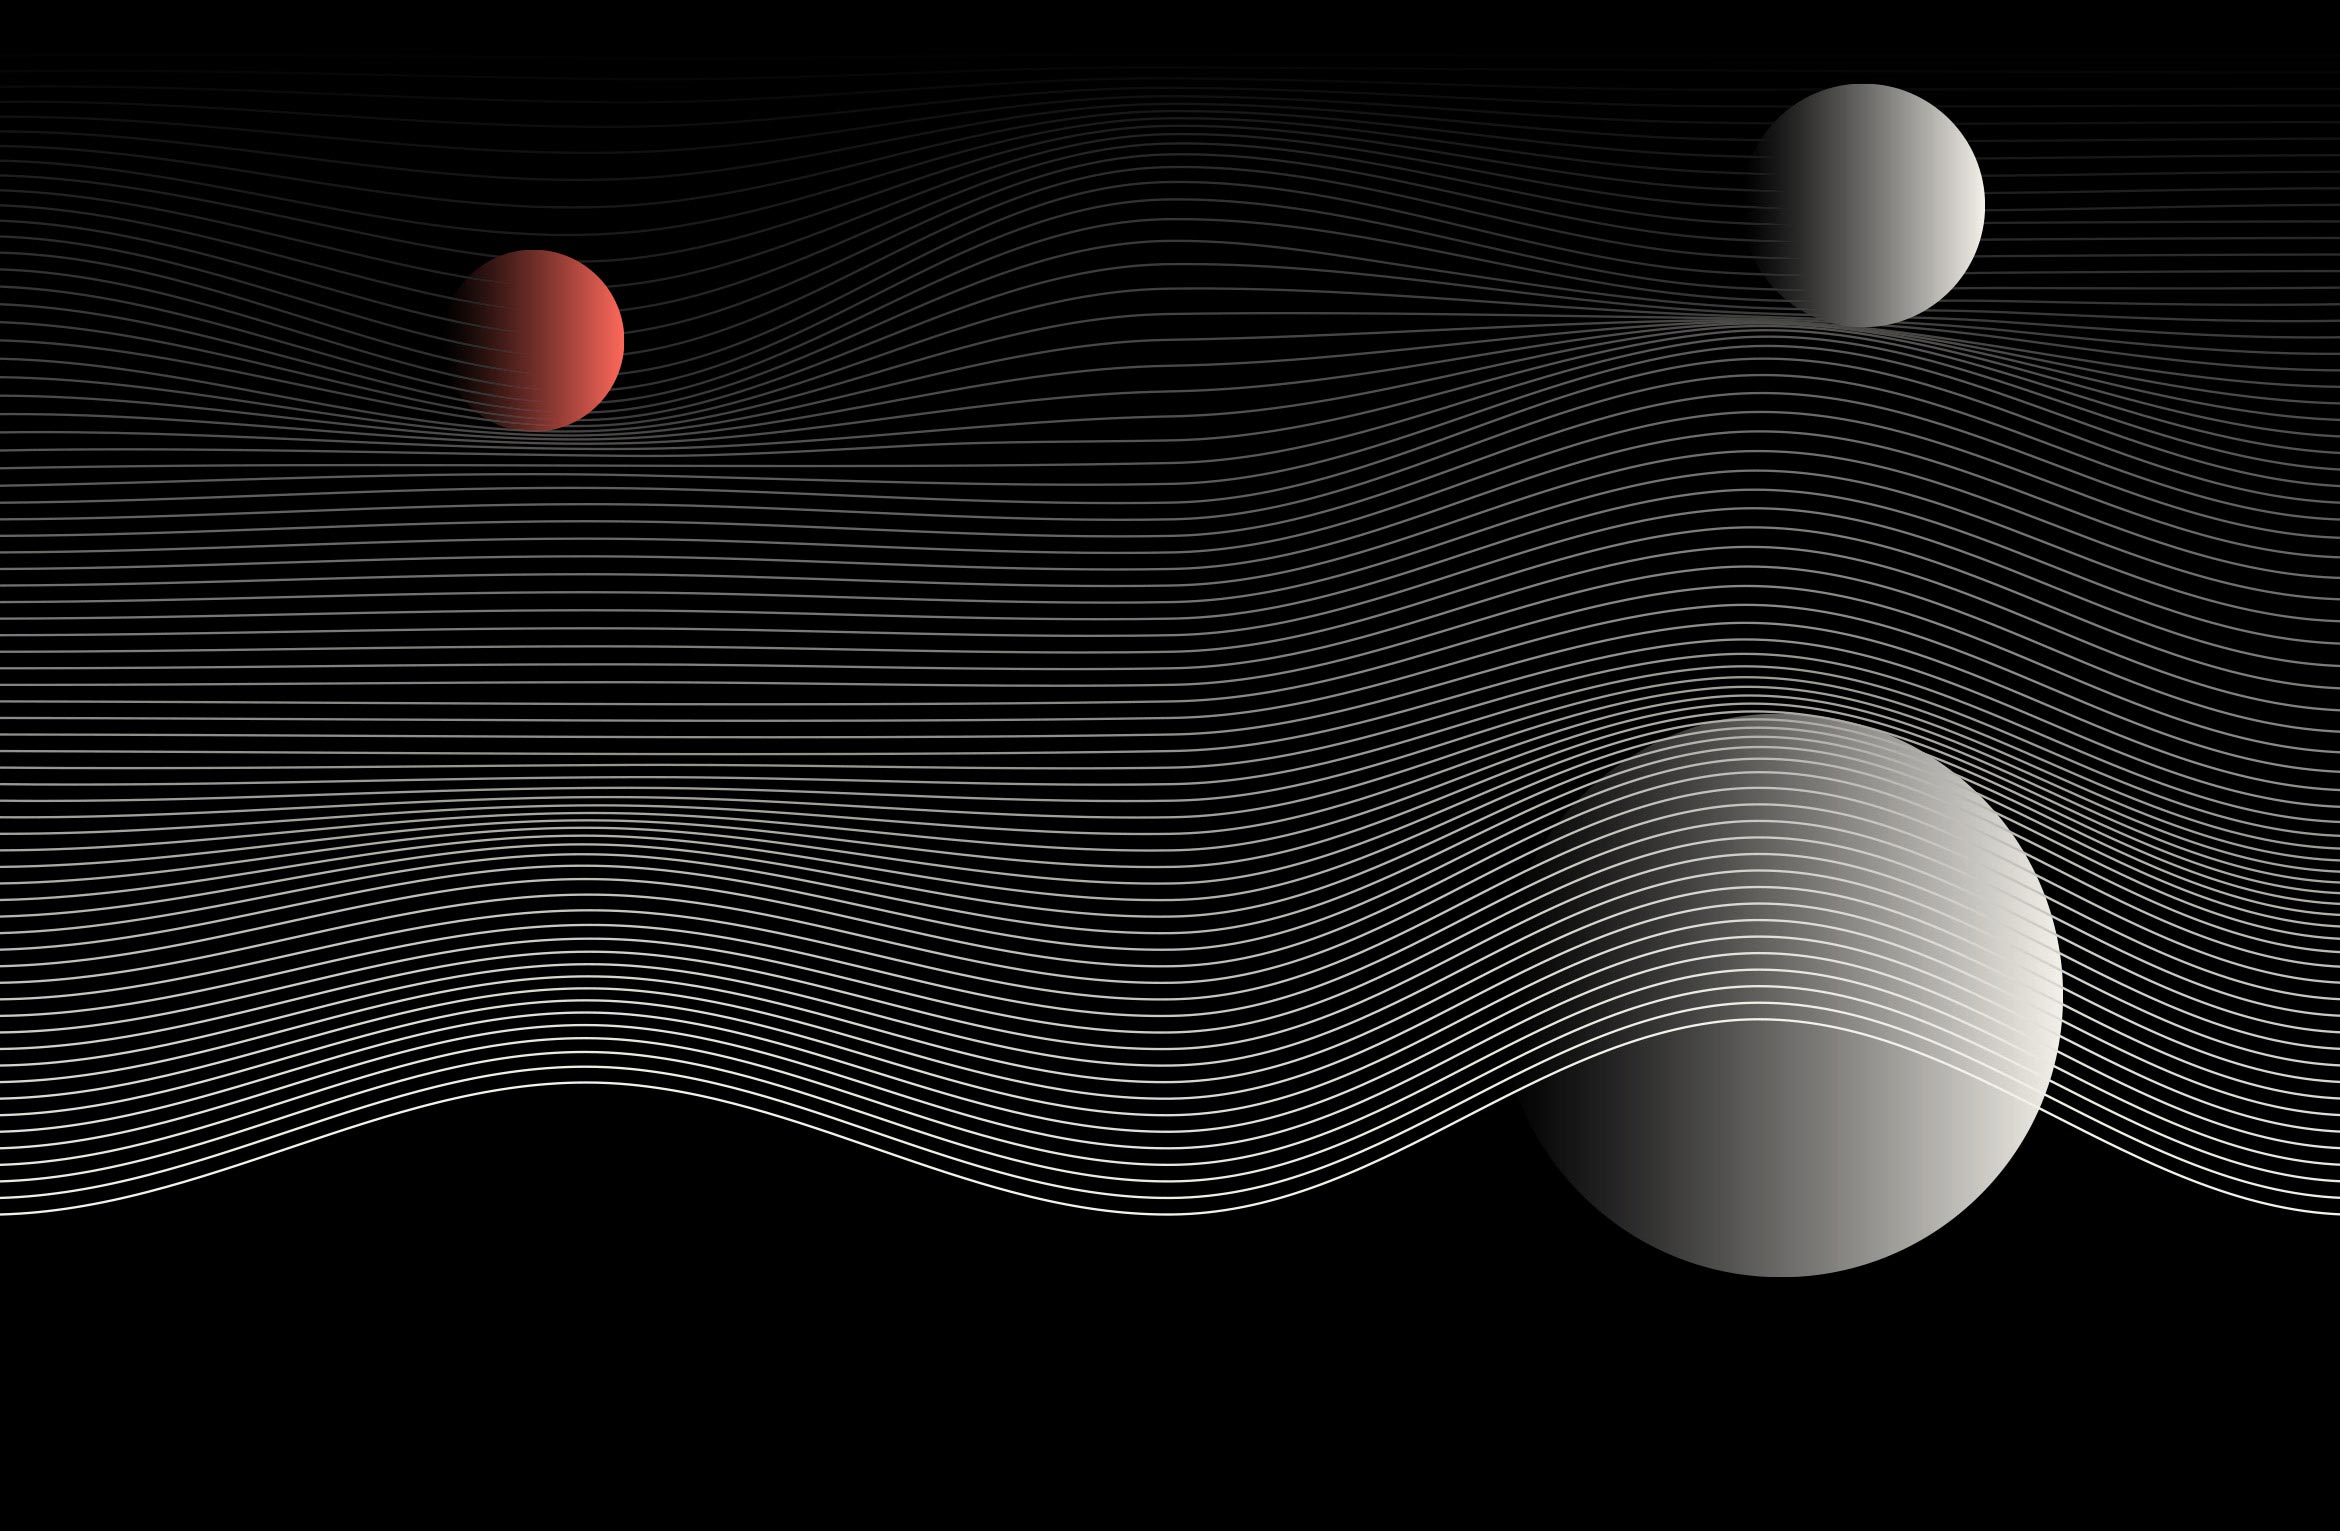 digital design of 3 gray and red spheres and wave pattern on black background